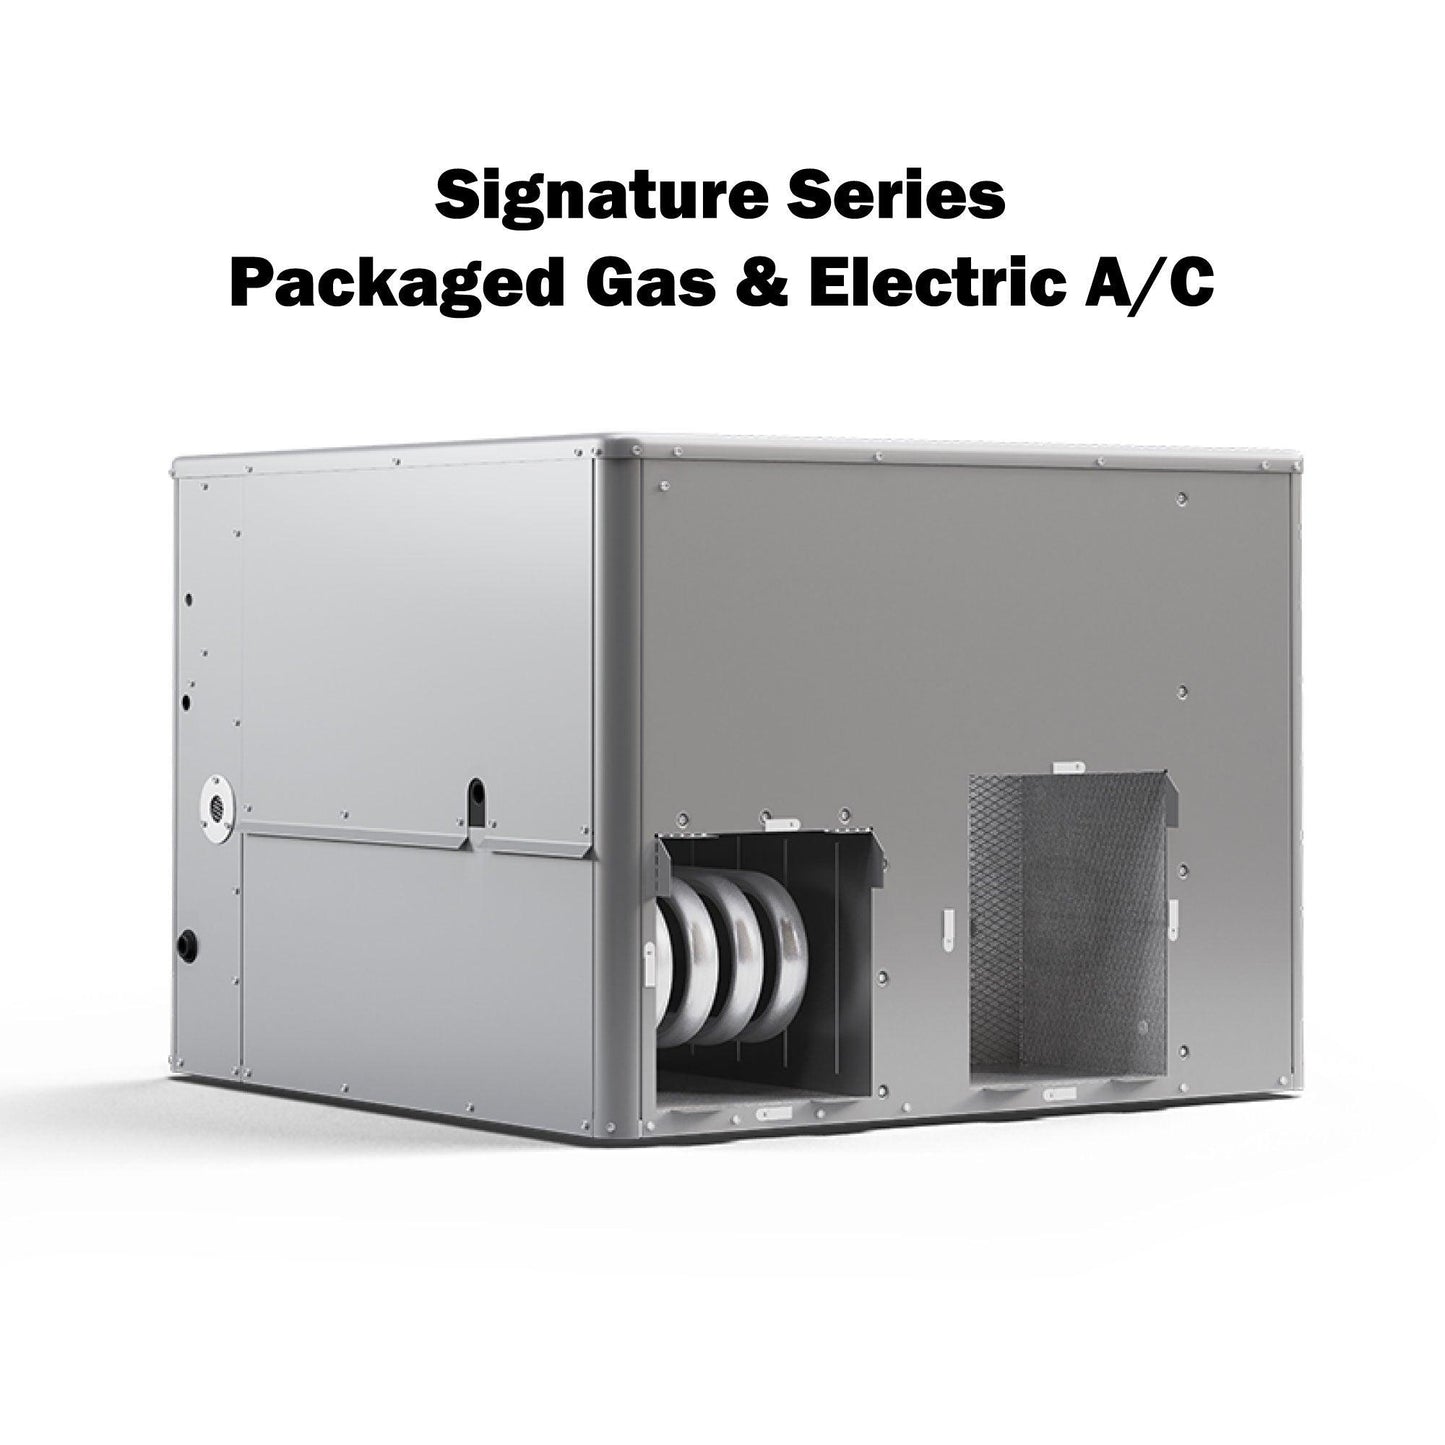 Signature Series Package Gas